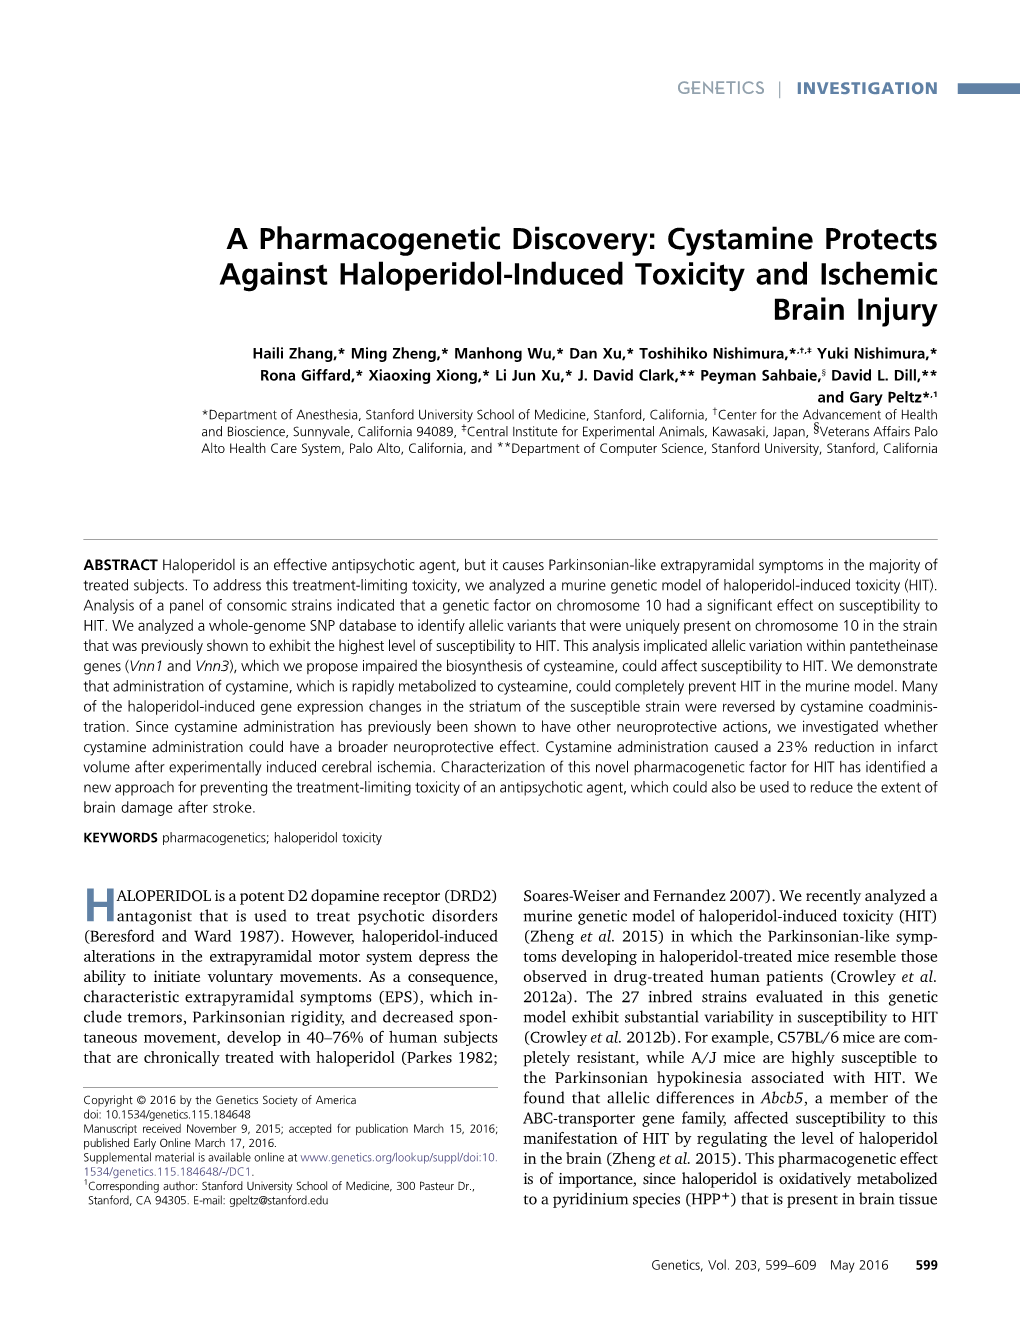 Cystamine Protects Against Haloperidol-Induced Toxicity and Ischemic Brain Injury